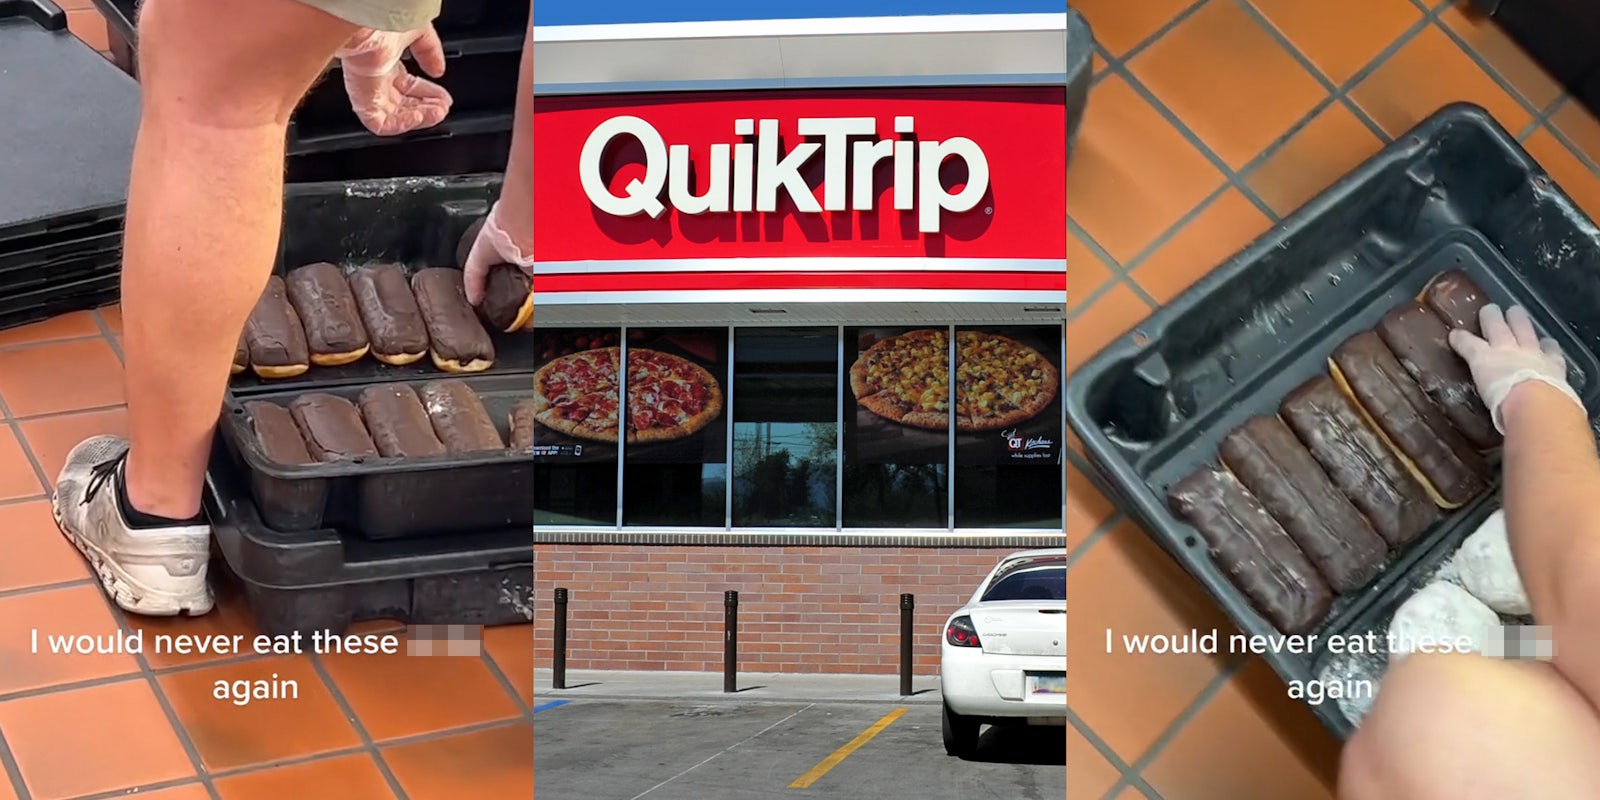 man with gloves on taking donuts out of black bin with caption 'I would never eat these blank again' (l) QuikTrip building with sign and parking lot (c) man with gloves on taking donuts out of black bin with caption 'I would never eat these blank again' (r)